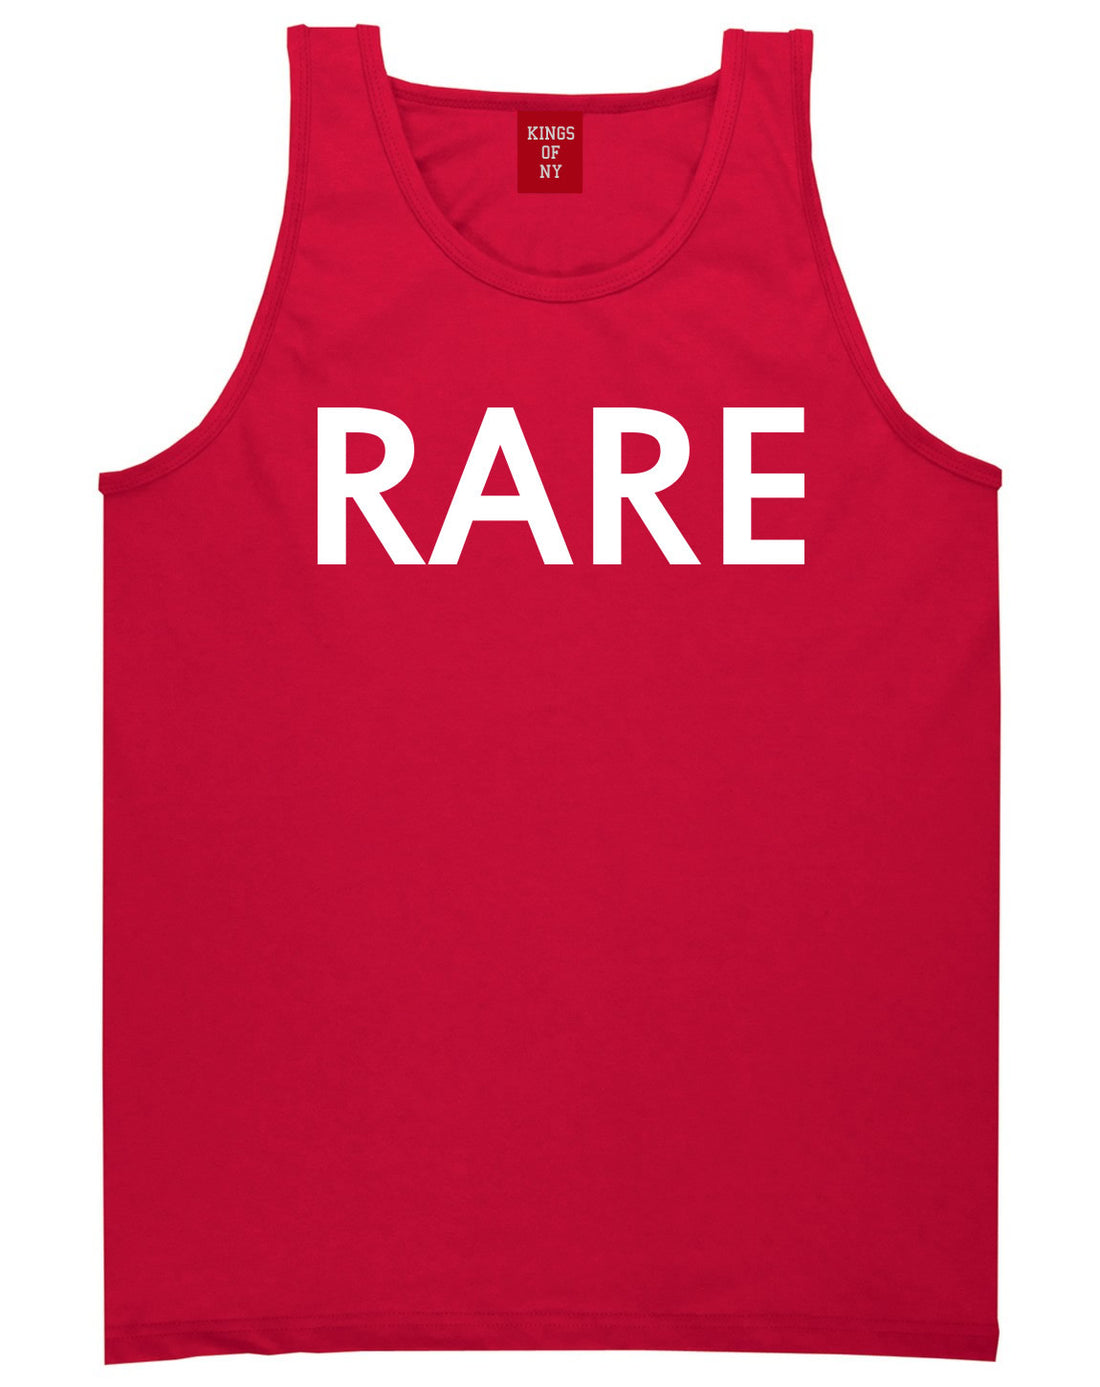 Kings Of NY Rare Tank Top in Red